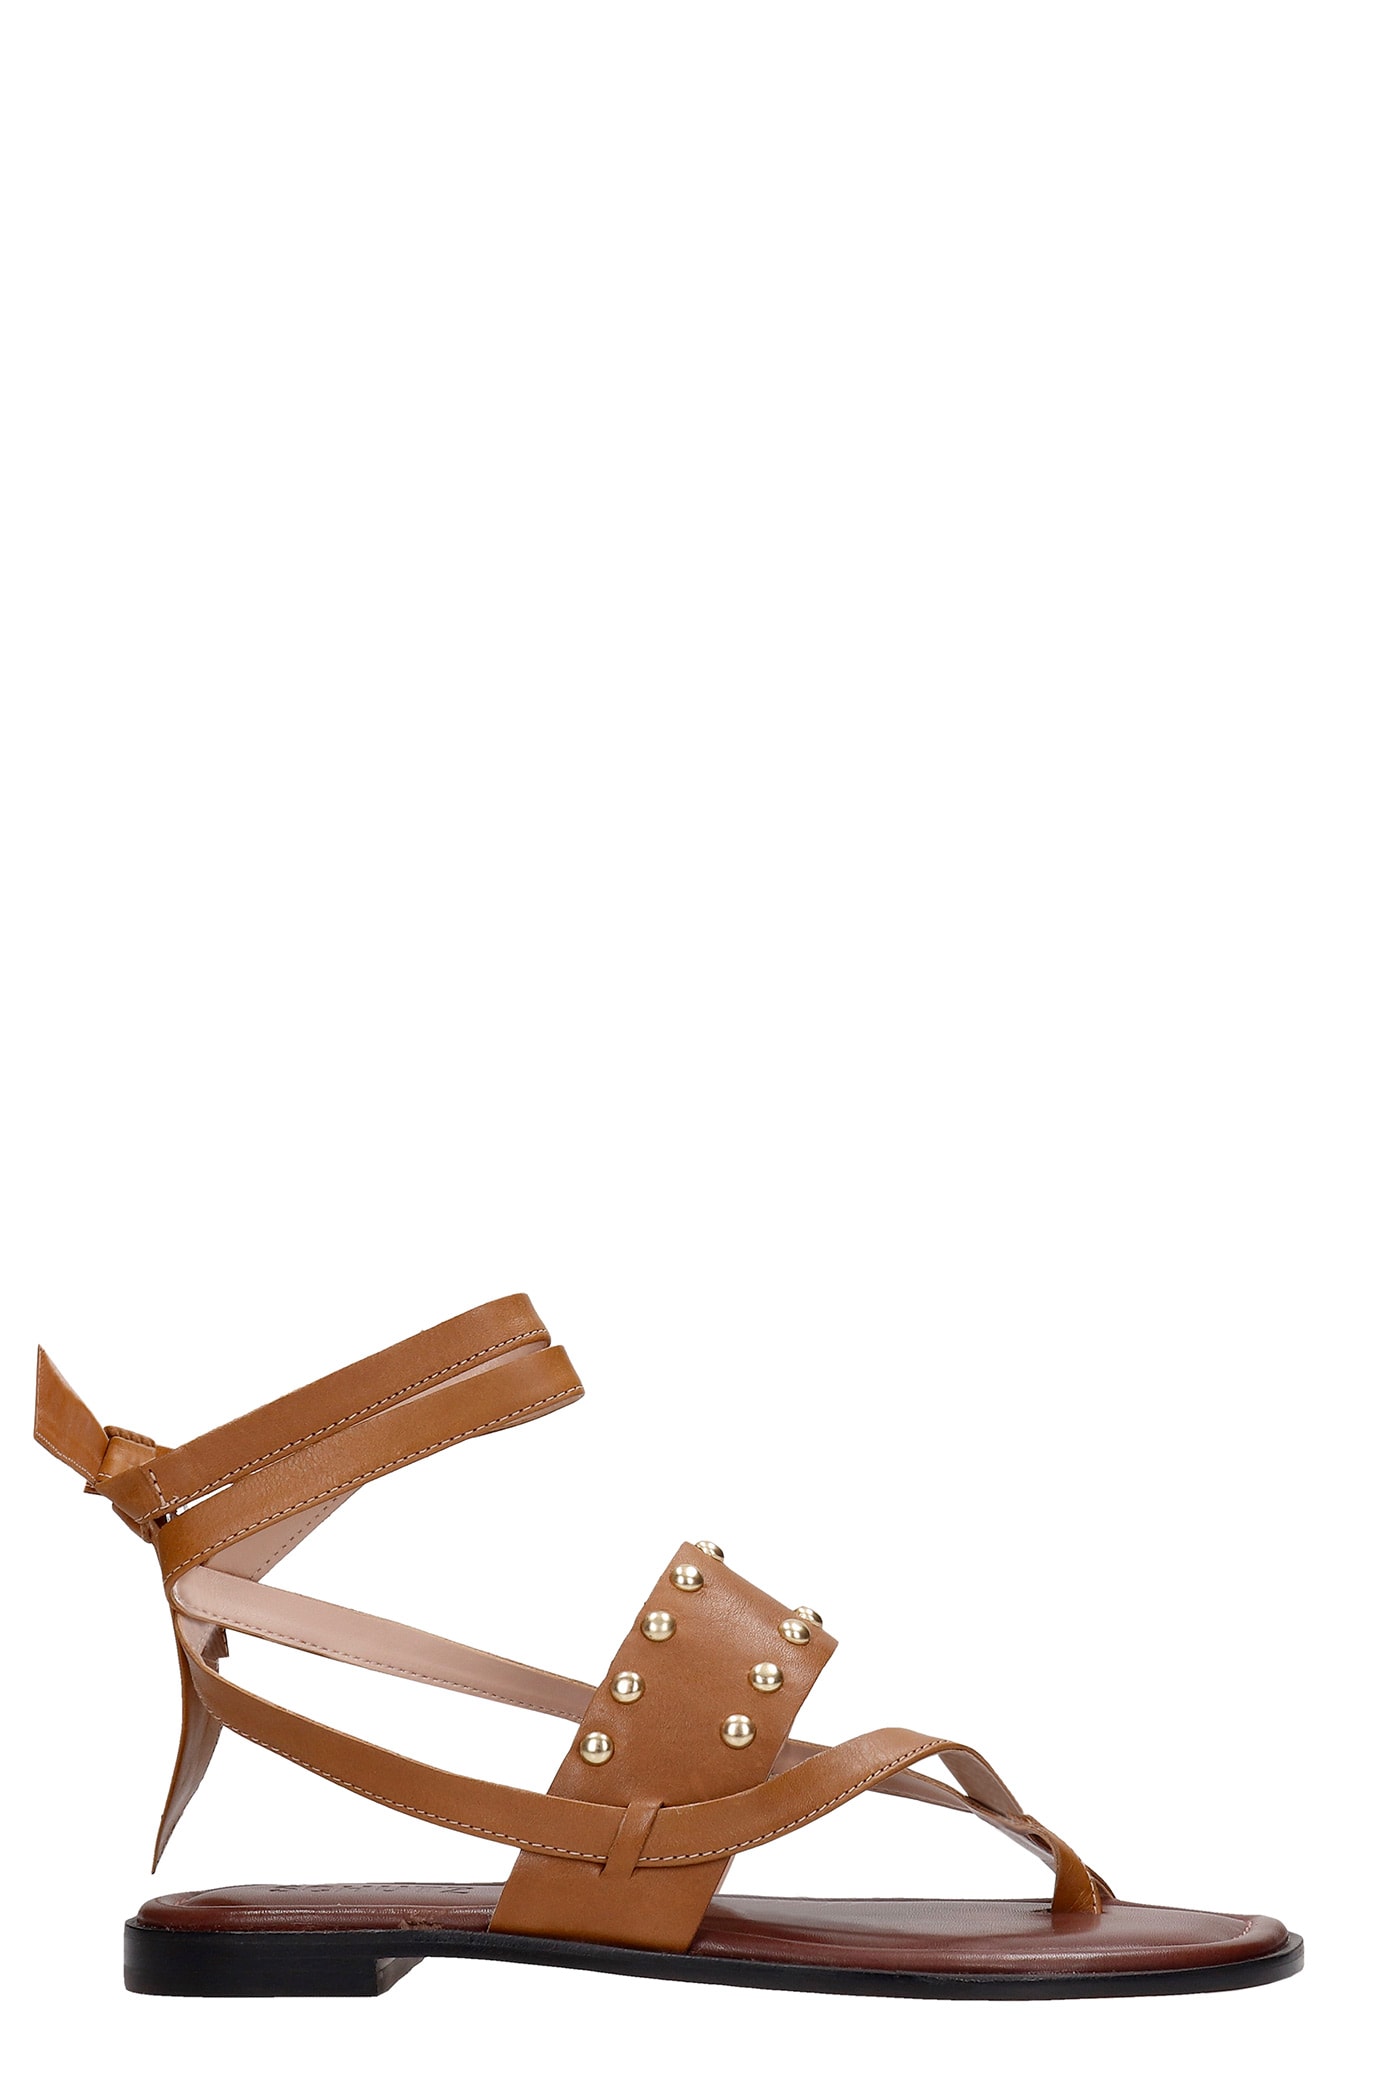 Schutz Flats In Leather Color Leather